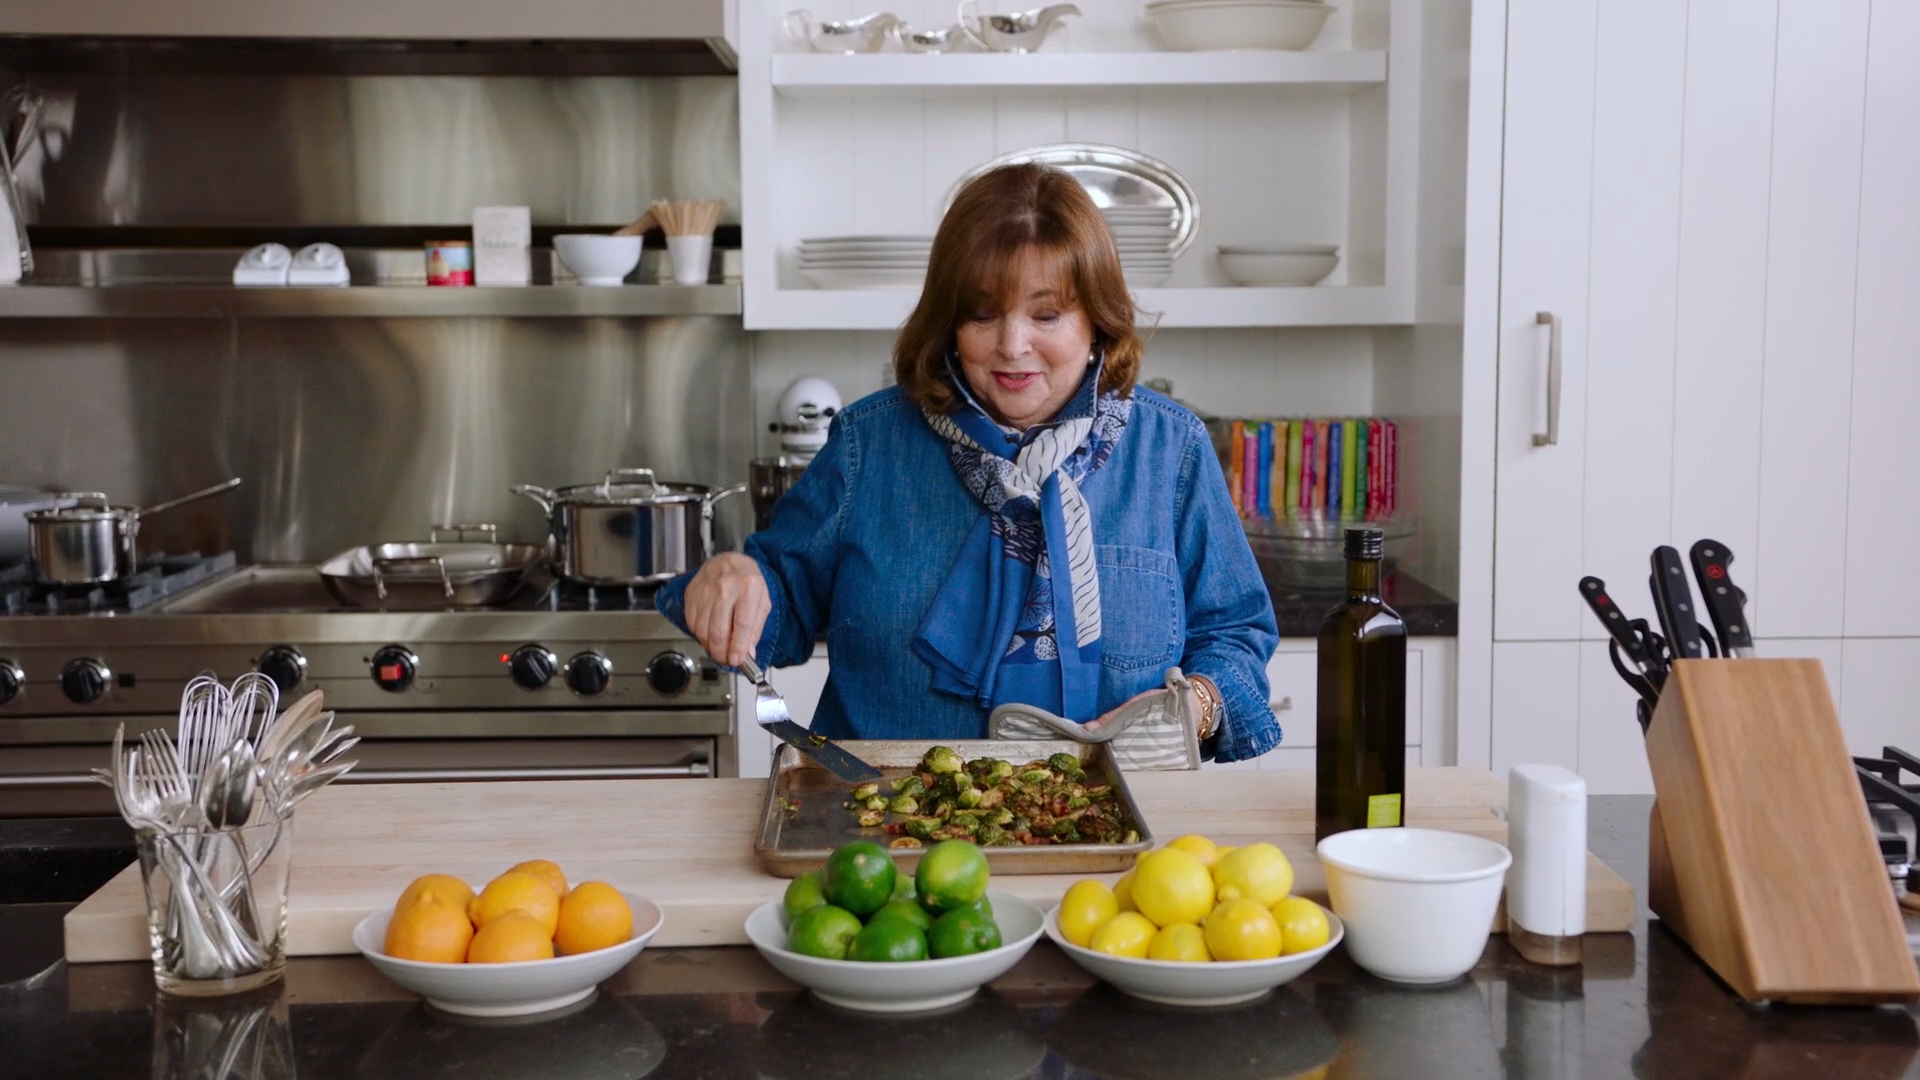 Ina Garten Shares Her Thanksgiving Recipes and Entertaining Tips Exclusively with Williams Sonoma